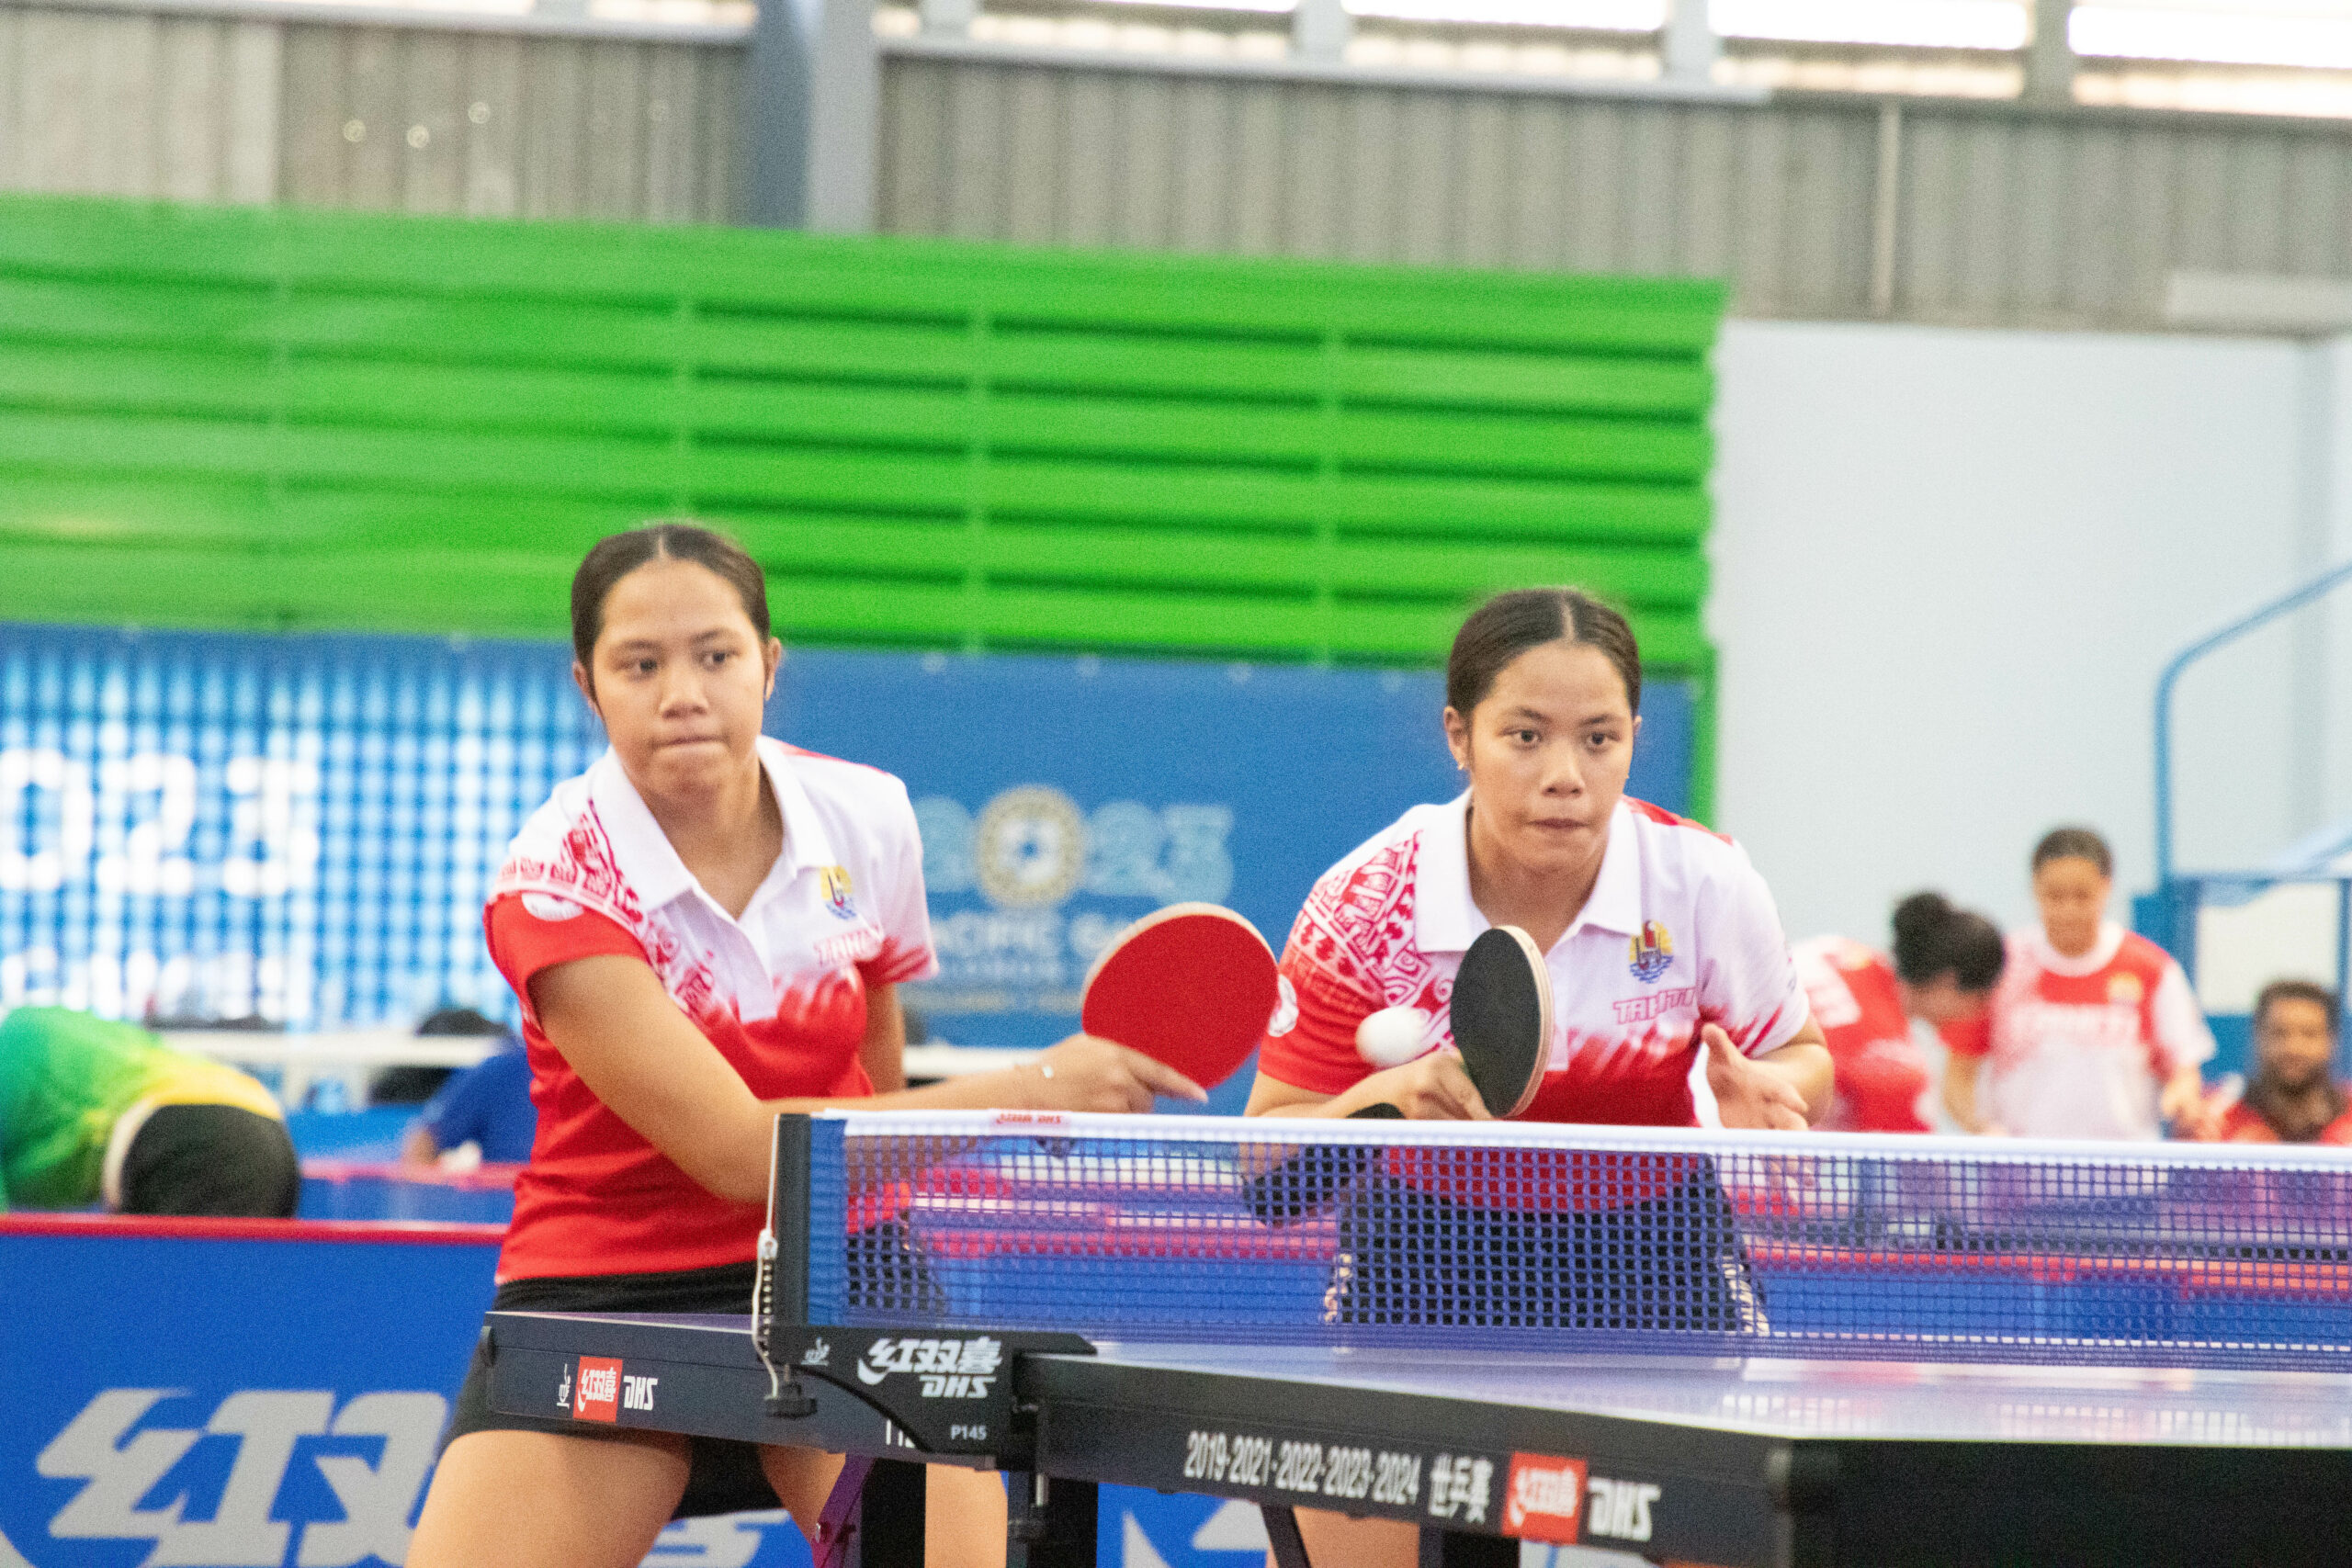 Twin sisters playing table tennis